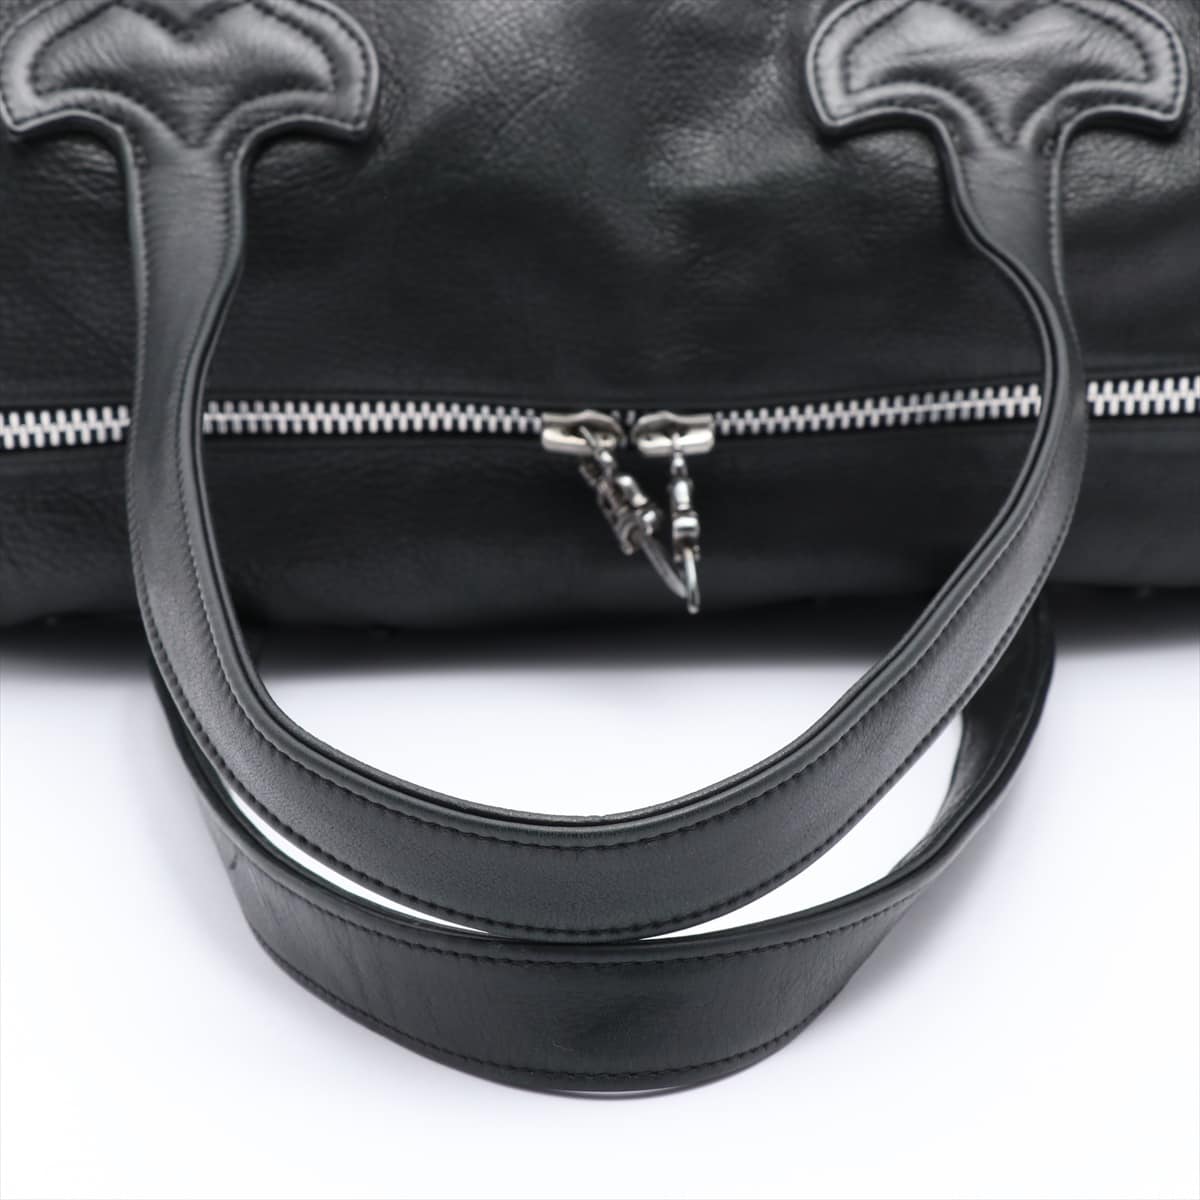 Chrome Hearts Cemetery Cross Patch Boston bag Leather Black